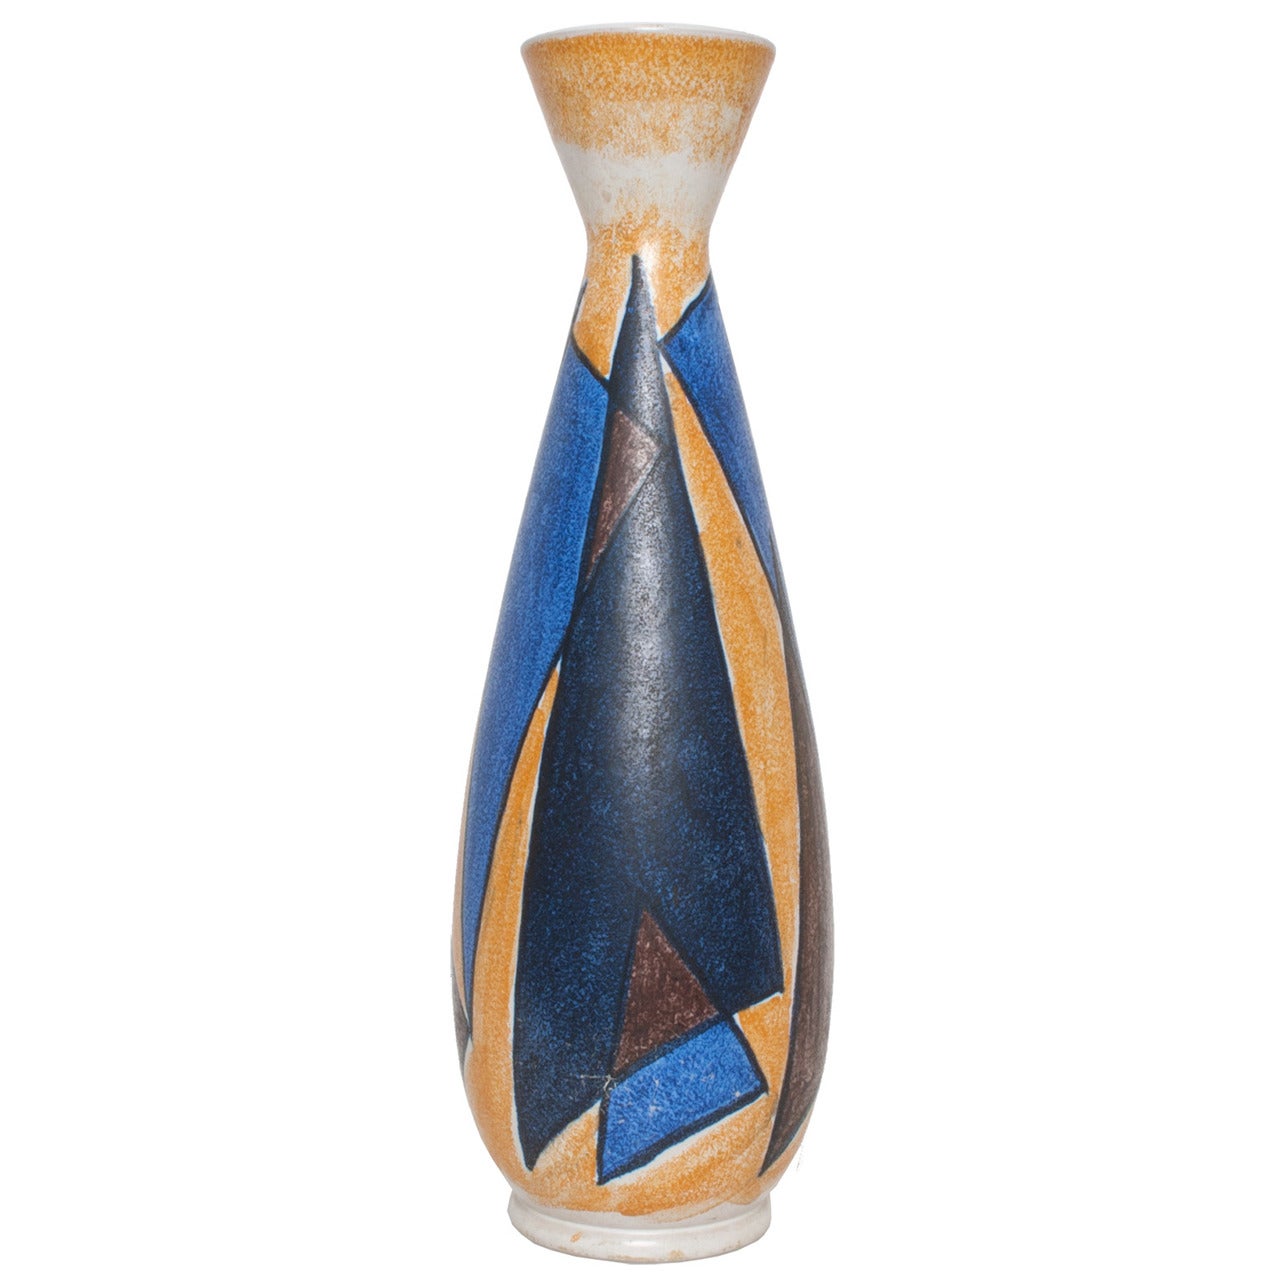 Scandinavian Modern Vase with Abstract Design by Mette Doller and Ivar Eriksson